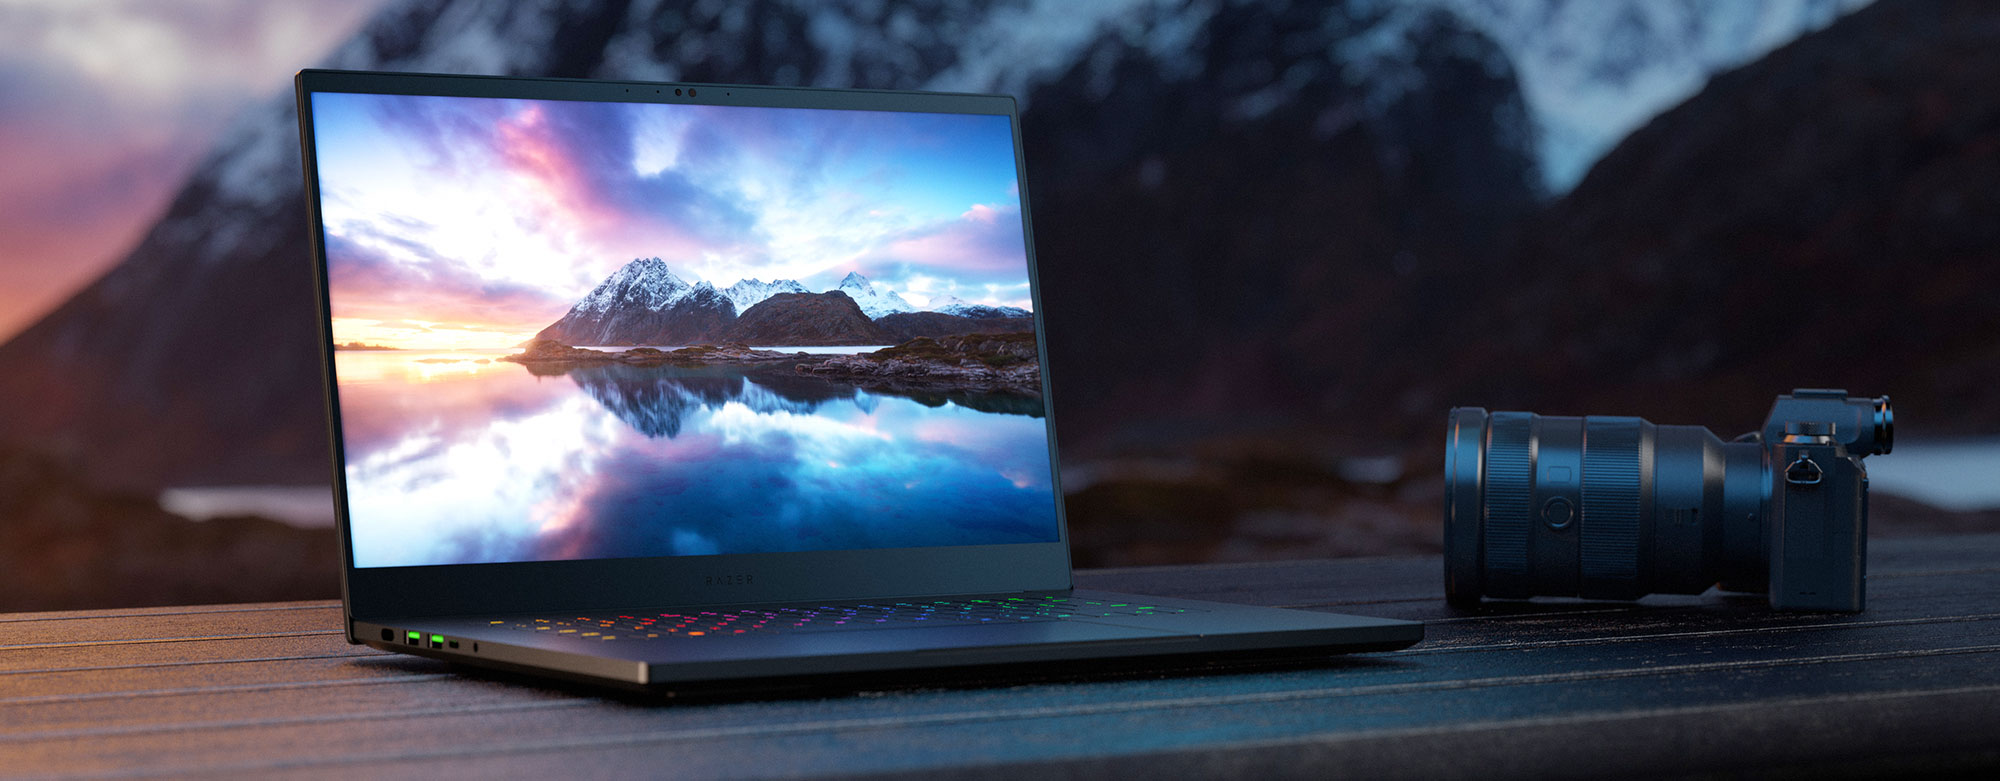 If money's no object, the Razer Blade OLED is an unmatched premium OLED notebook